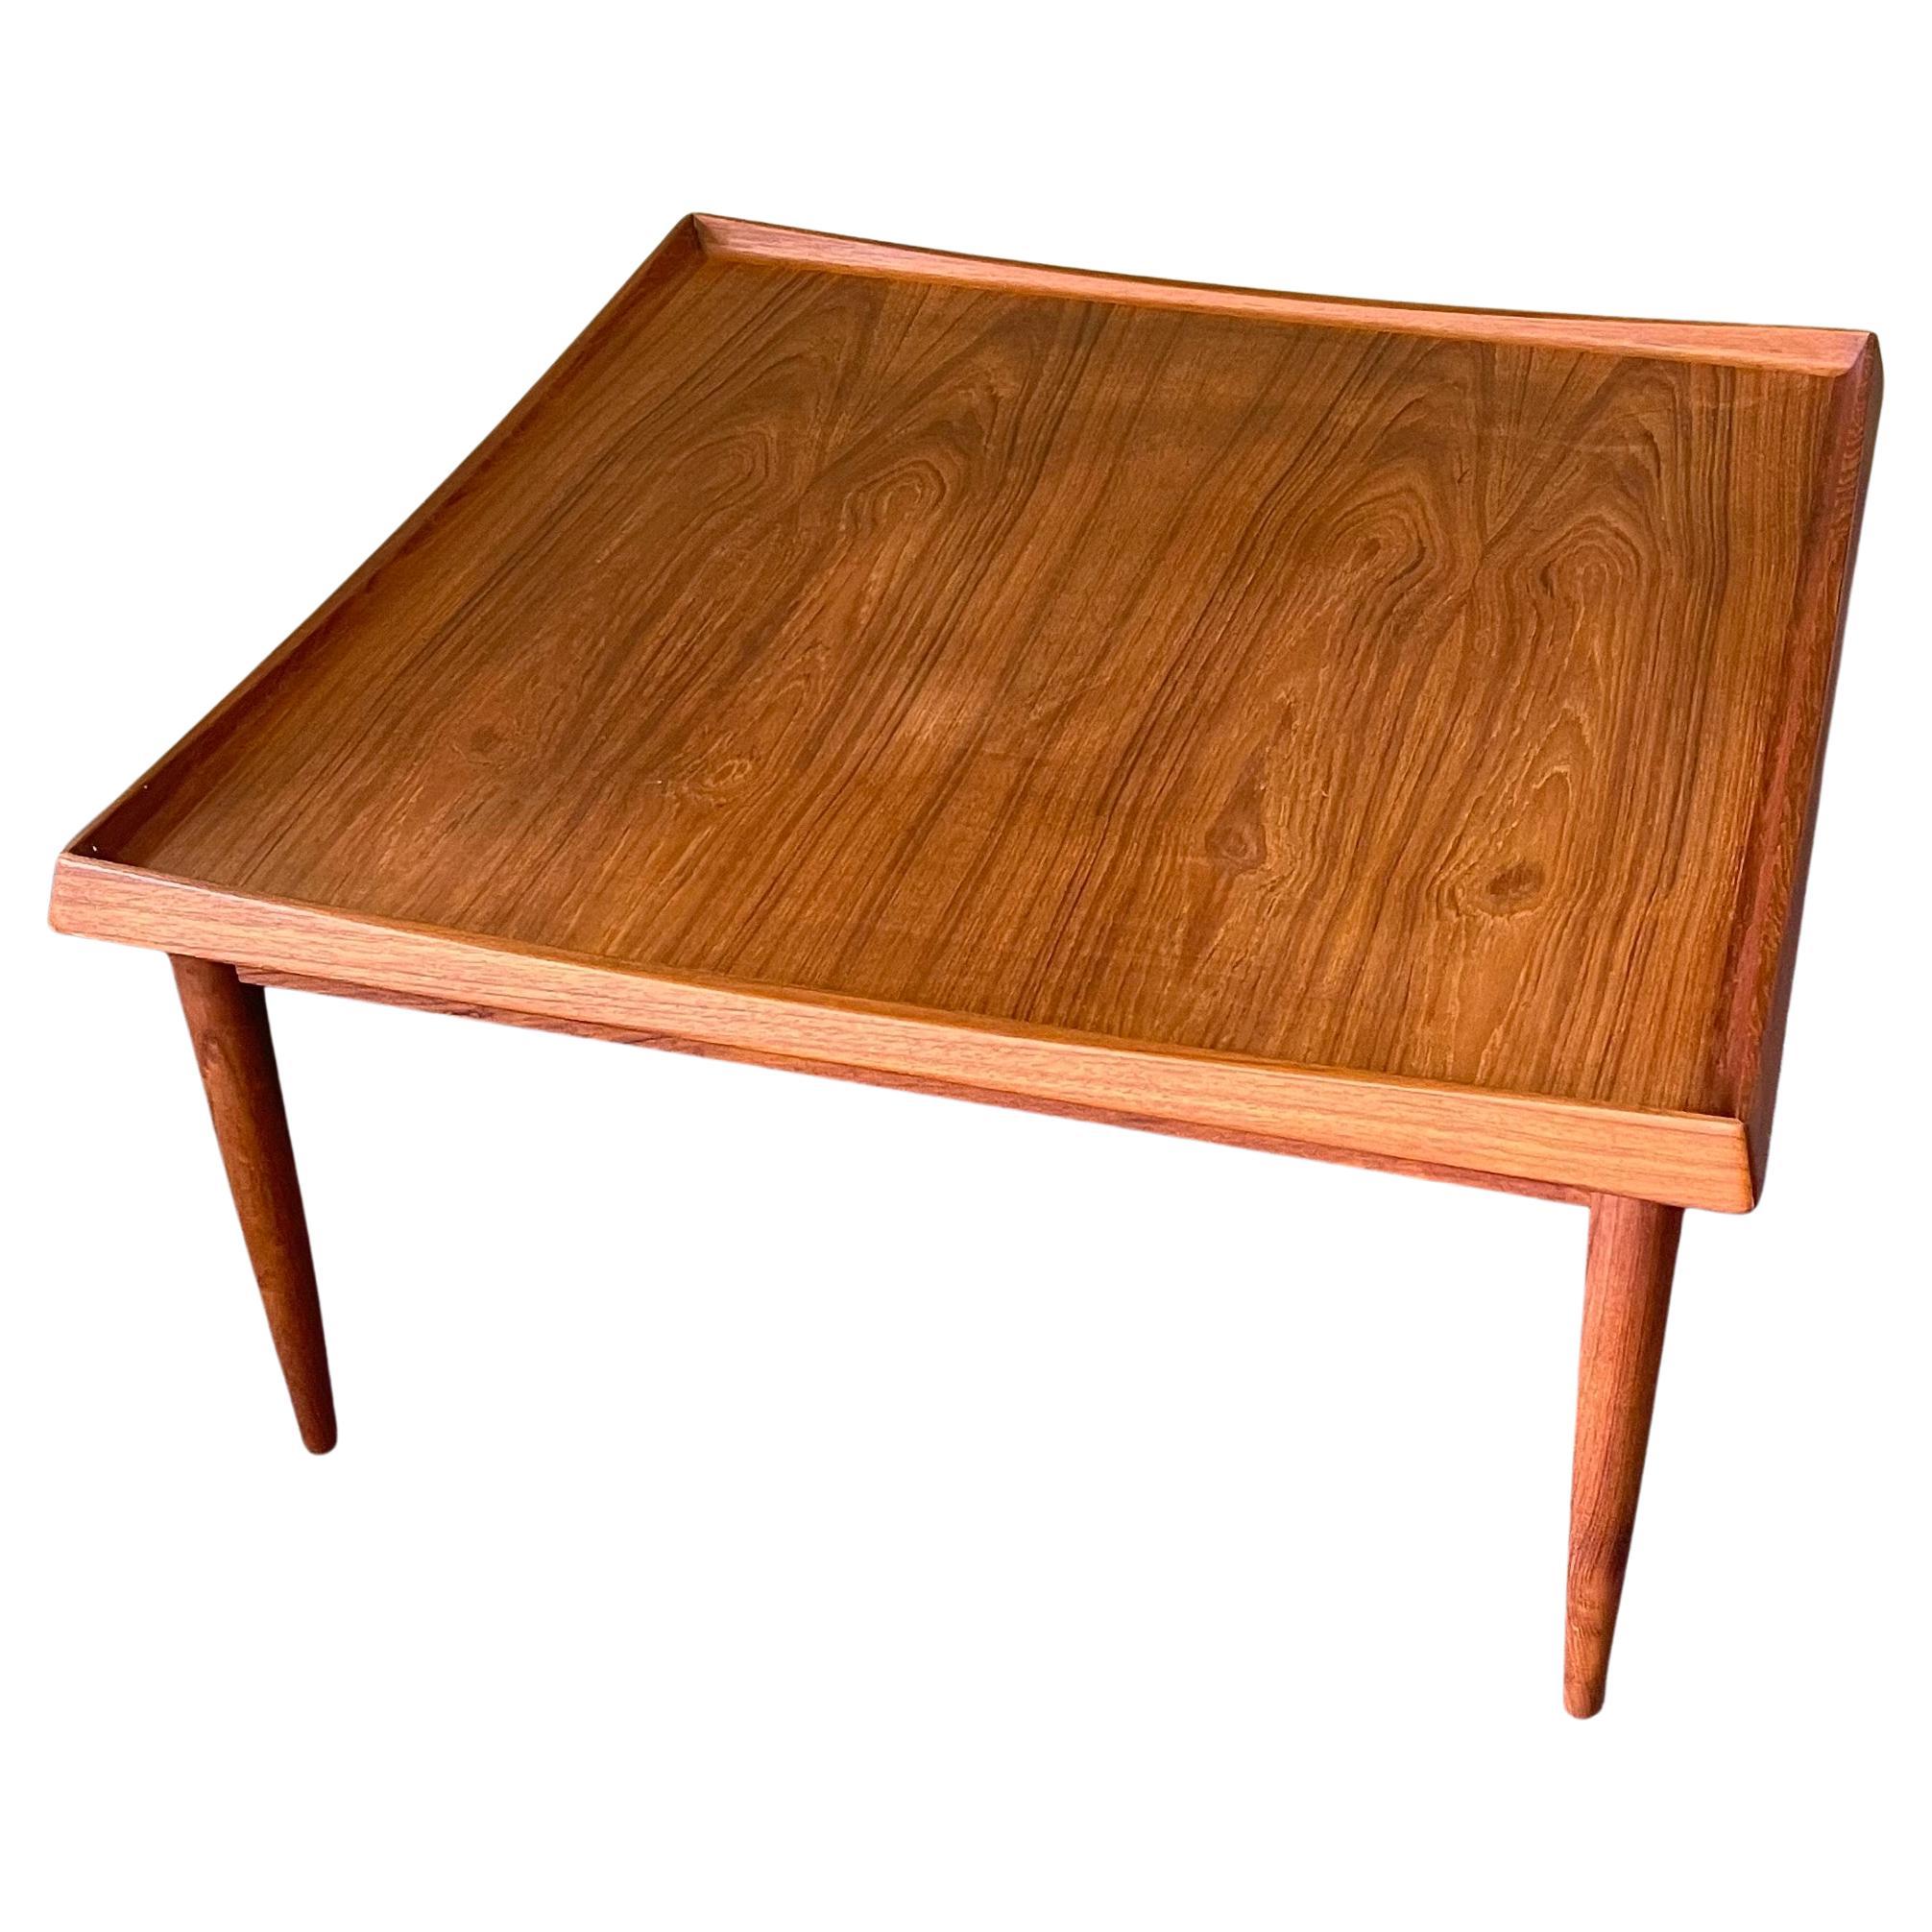 Danish Modern Solid Teak Coffee Table by Moredo For Sale